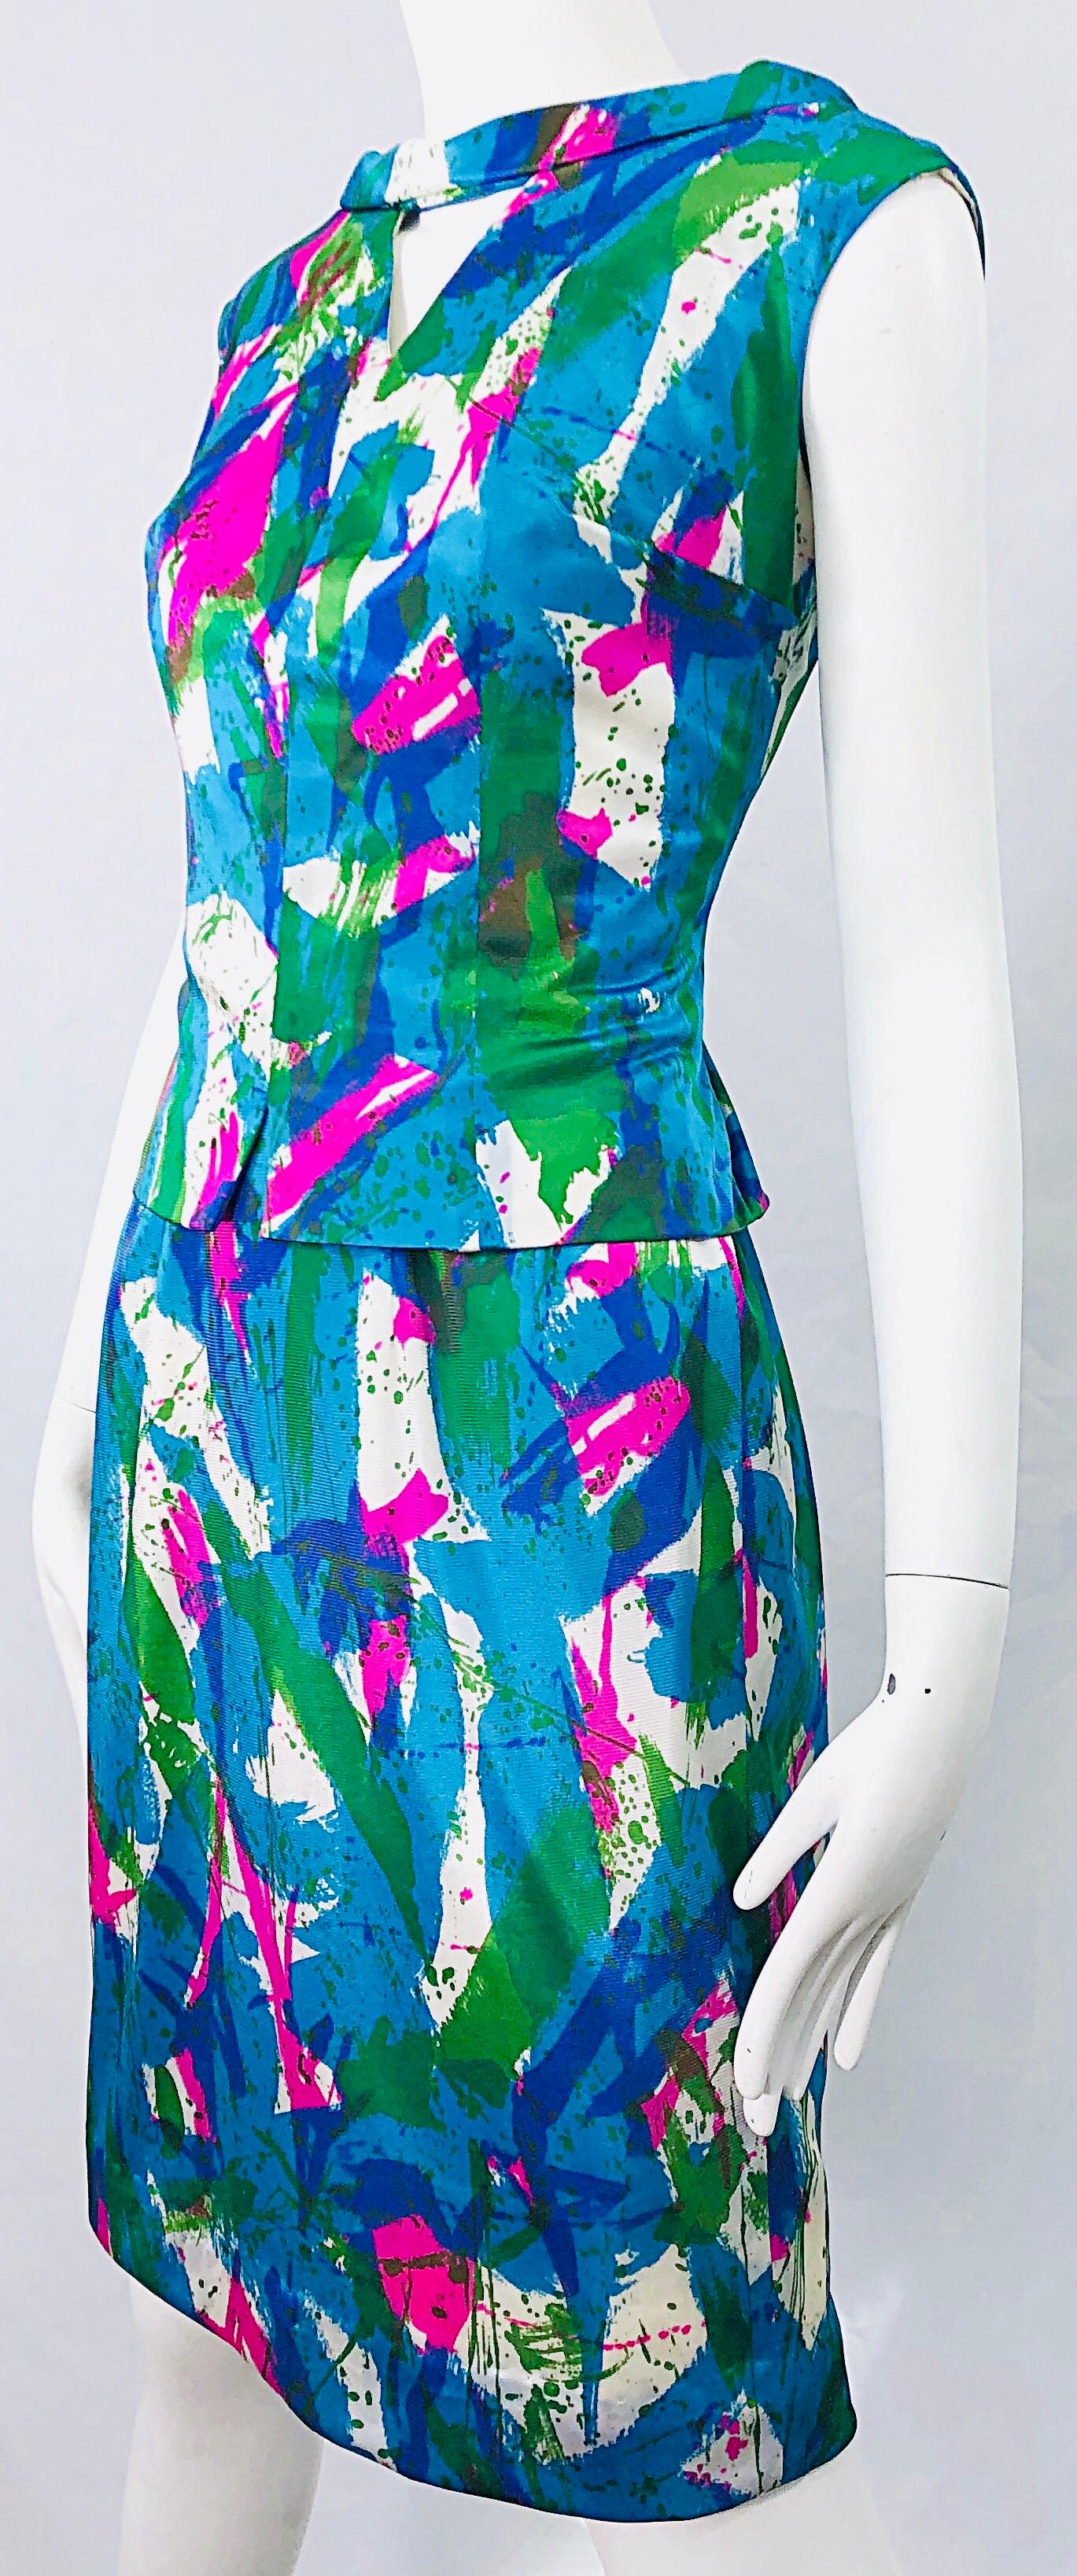 Chic 1960s Neon Abstract Print Two Piece Vintage 60s Sheath Dress + Top Blouse  For Sale 2